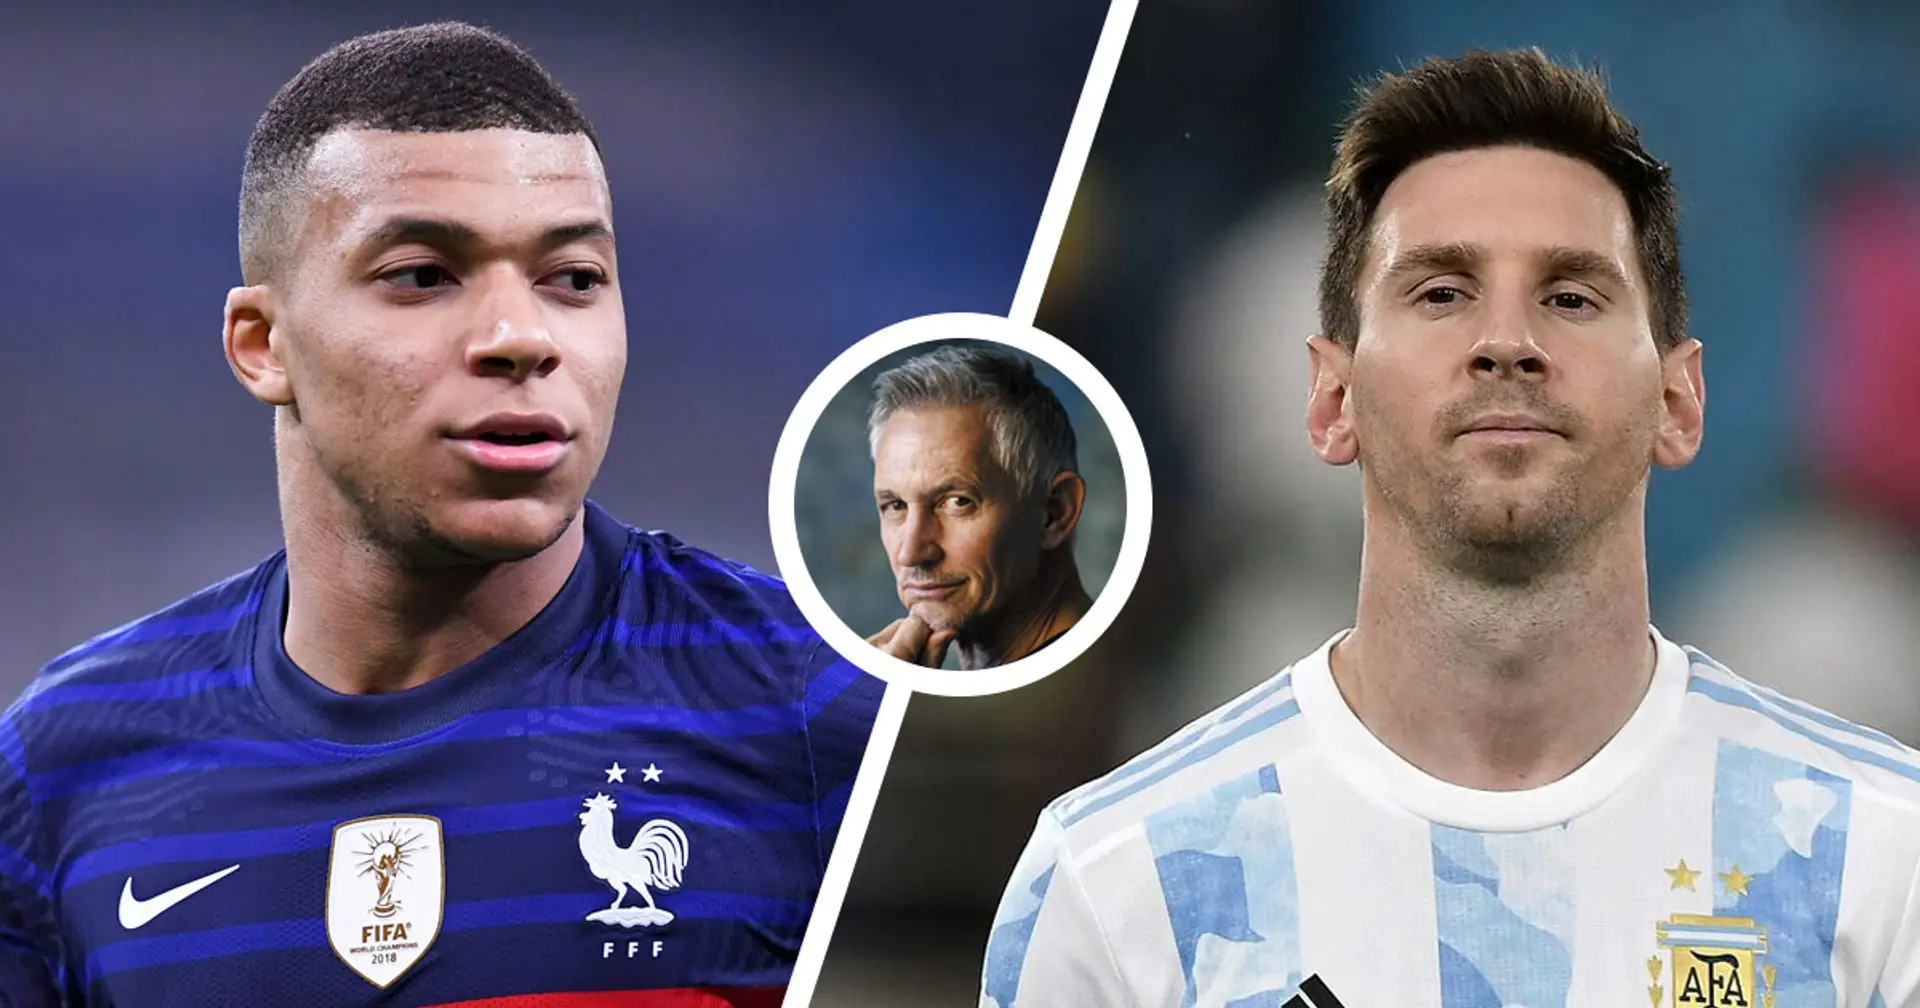 Gary Lineker: 'Mbappe is most likely to emulate Ronaldo but not Messi - he can do things that others simply can't'